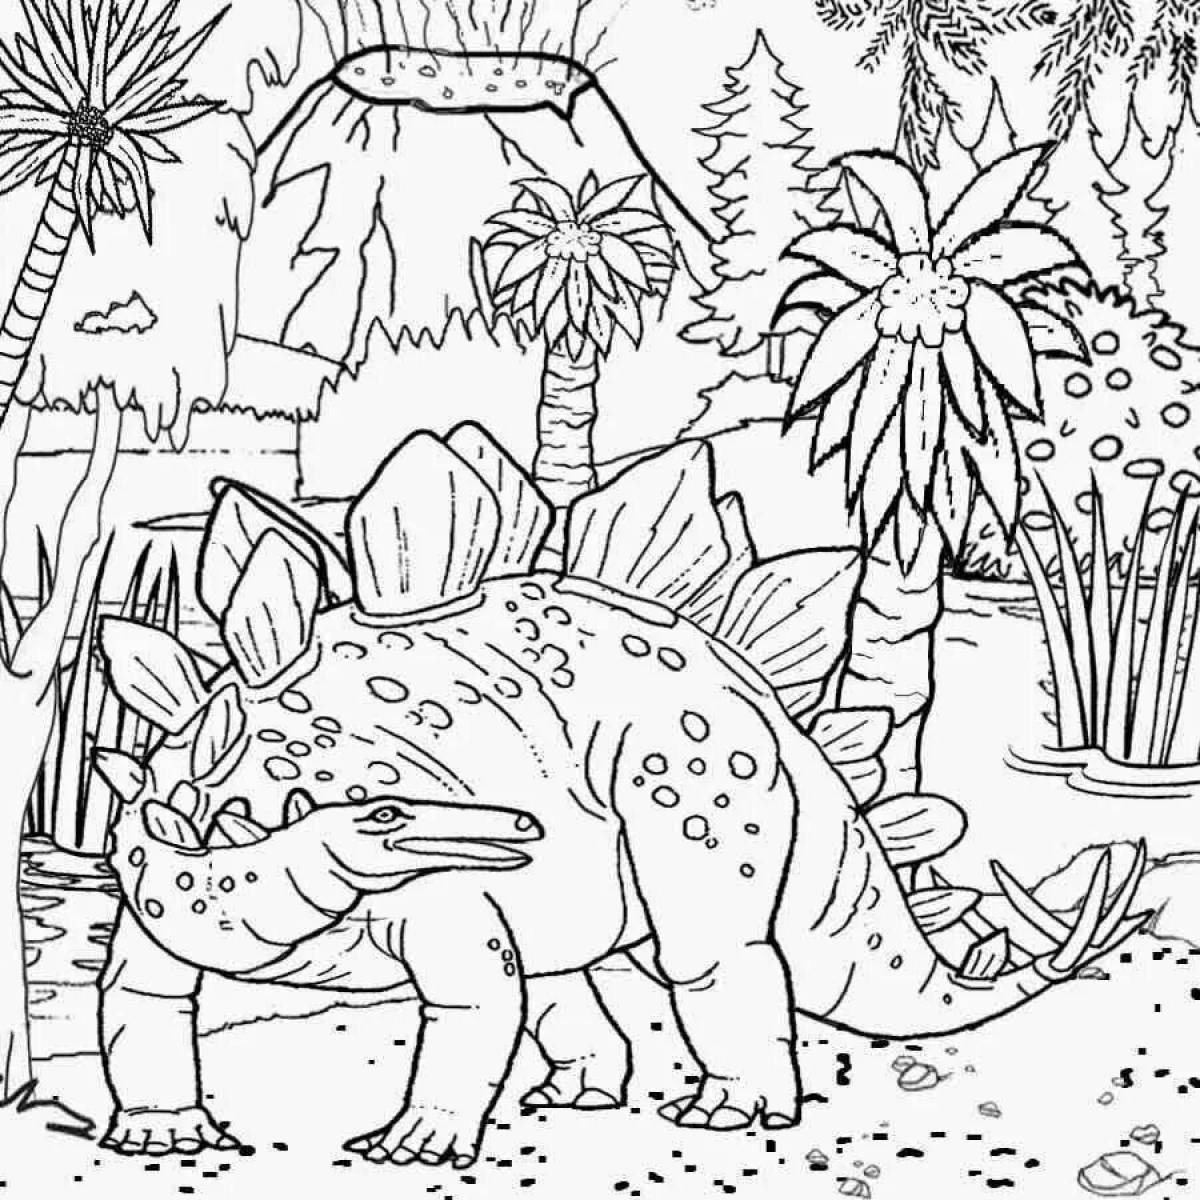 Coloring pages with playful dinosaurs for 7-8 year olds